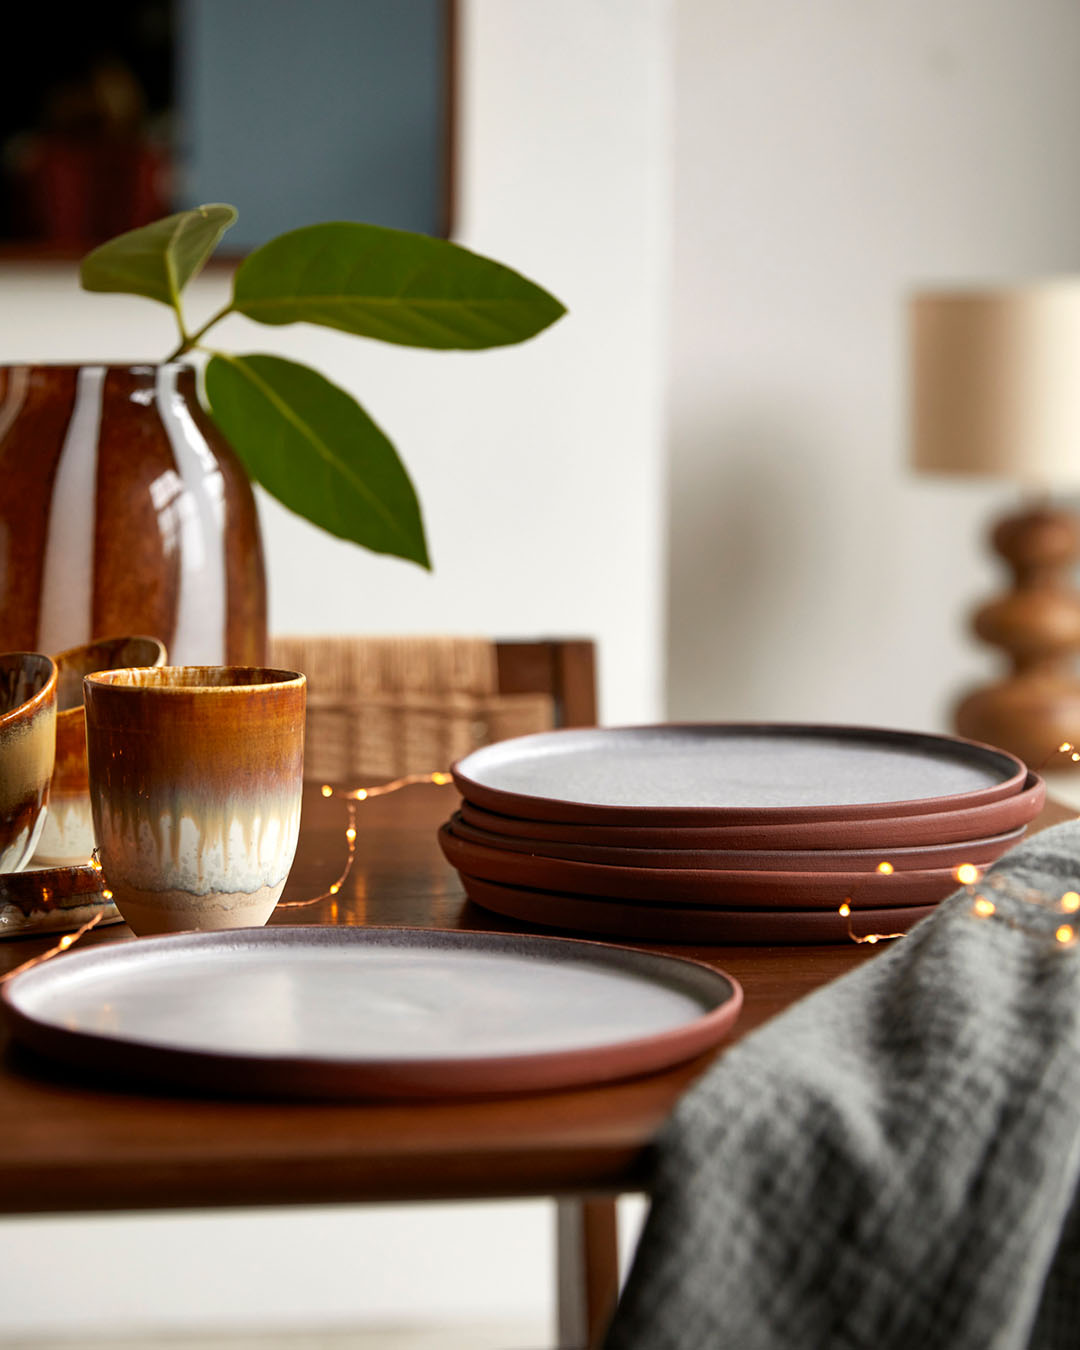 Red stoneware everyday plate